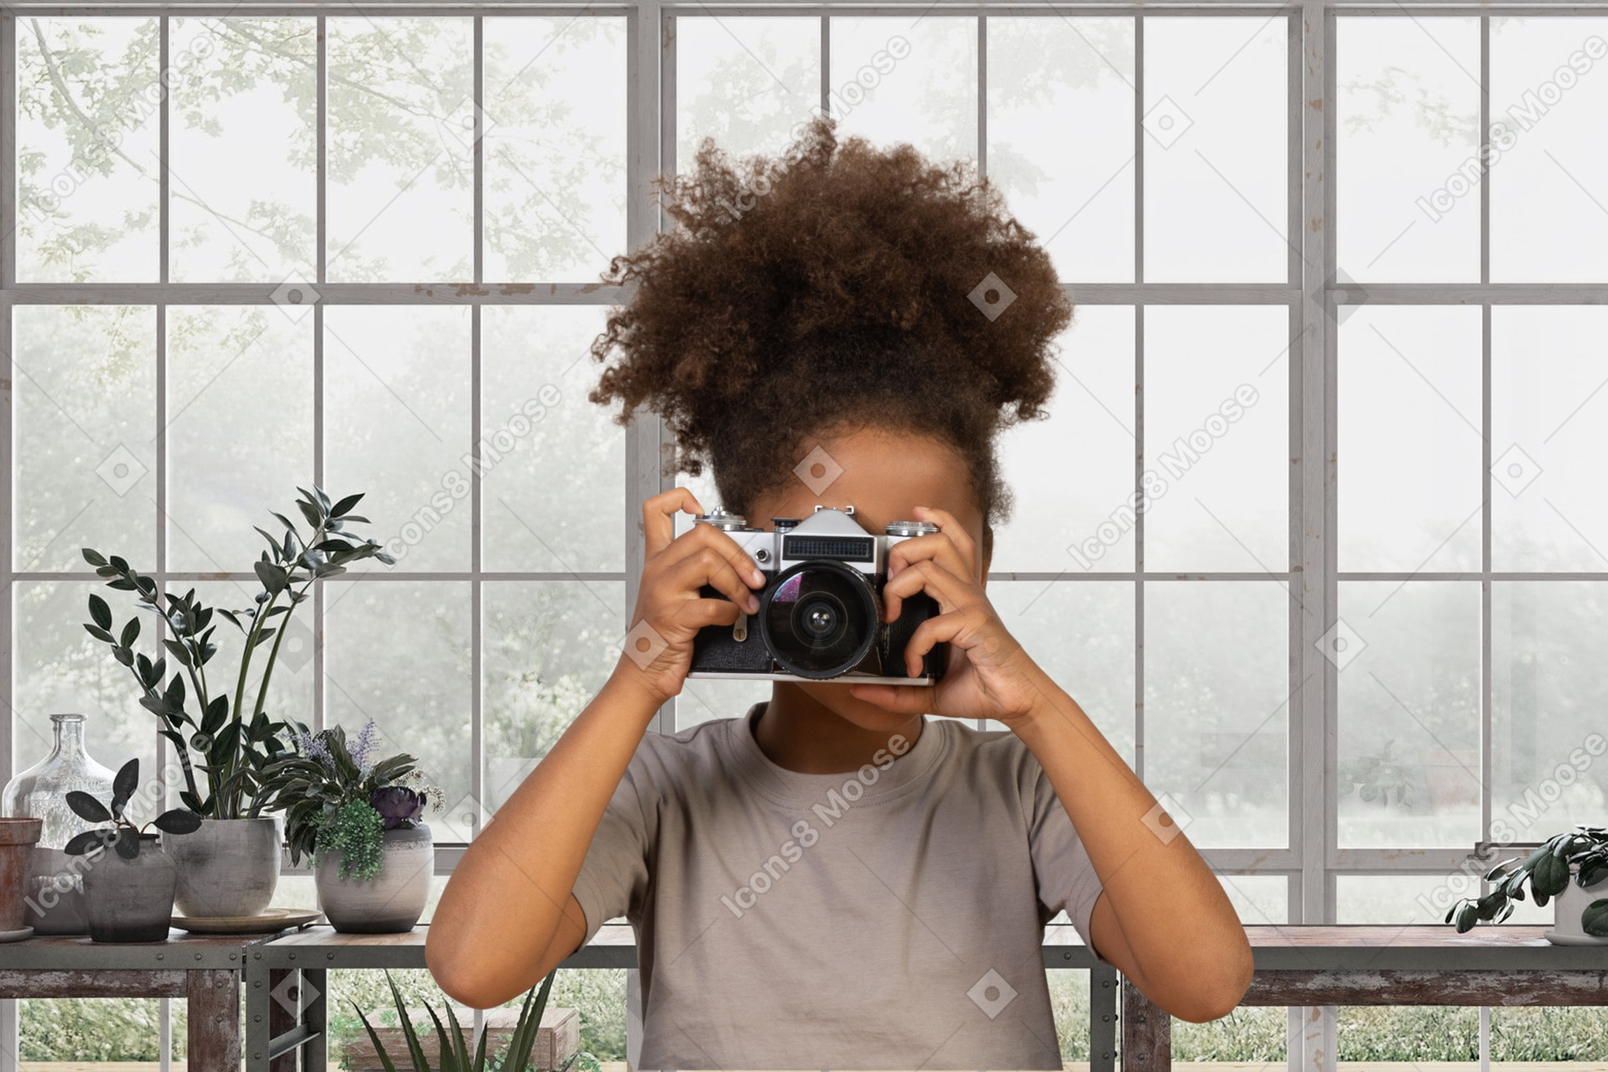 A young woman takes a picture of herself in the window of her home